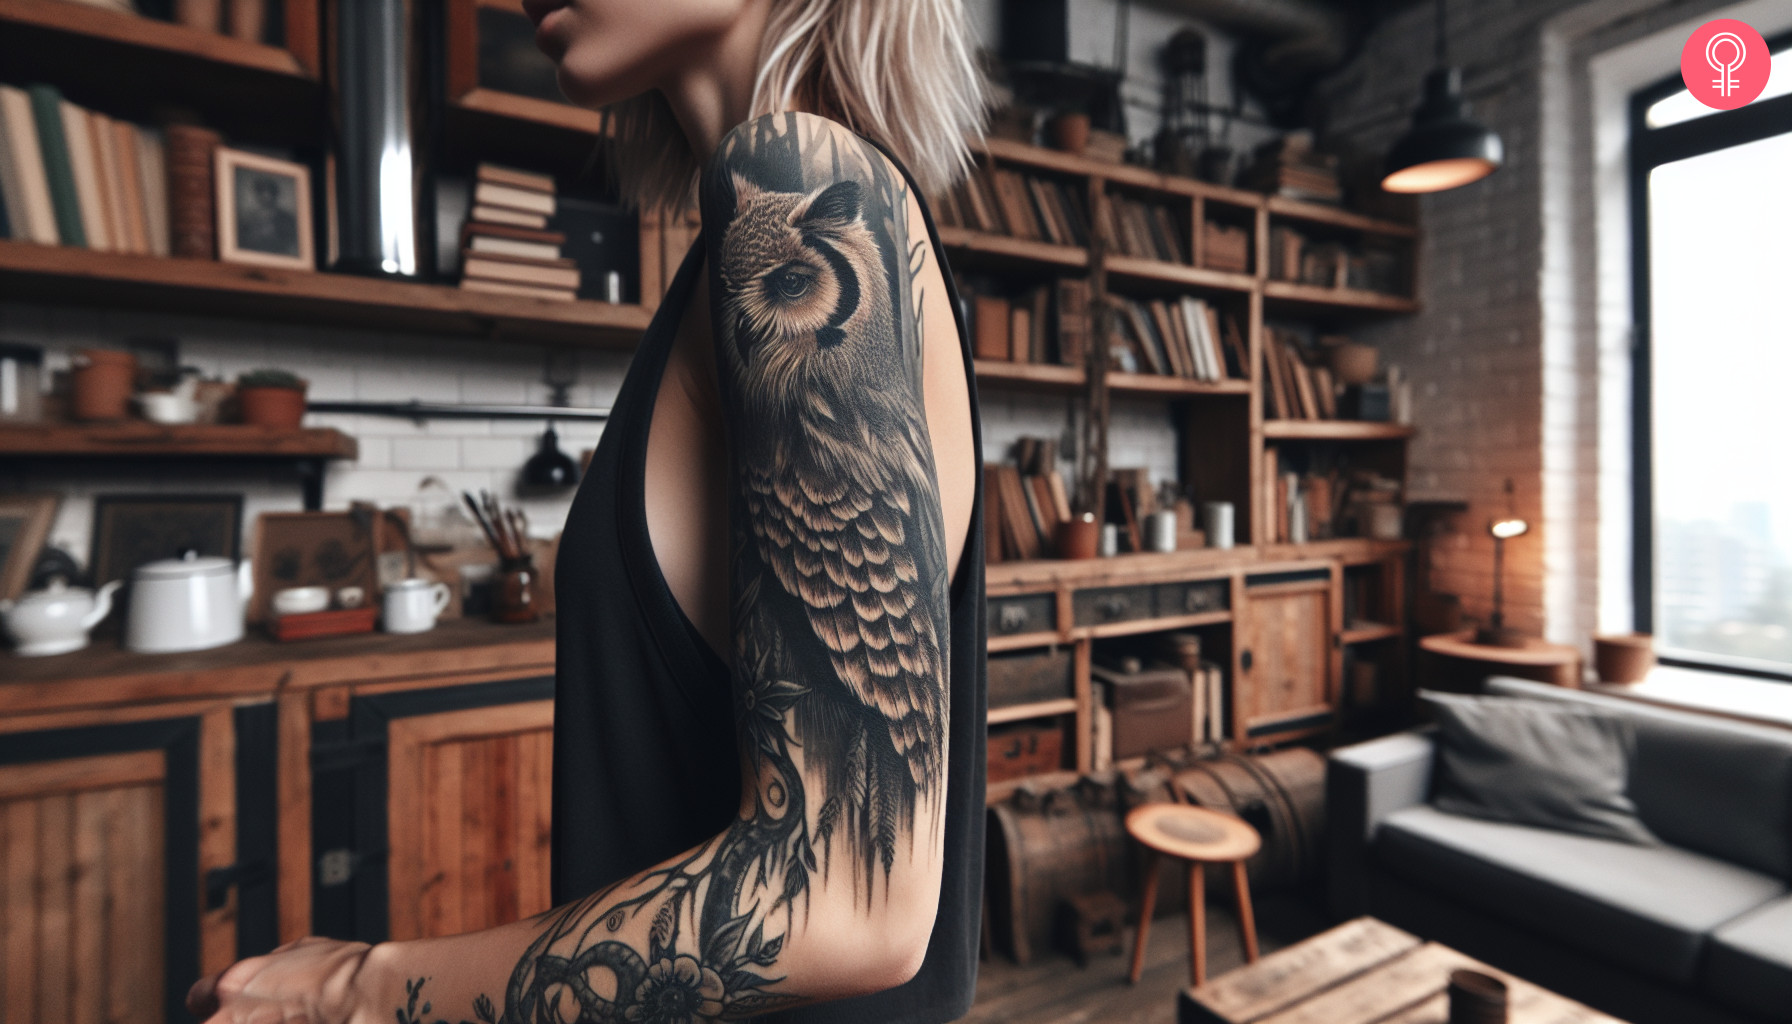 Woman with a grunge aesthetic tattoo on the arm